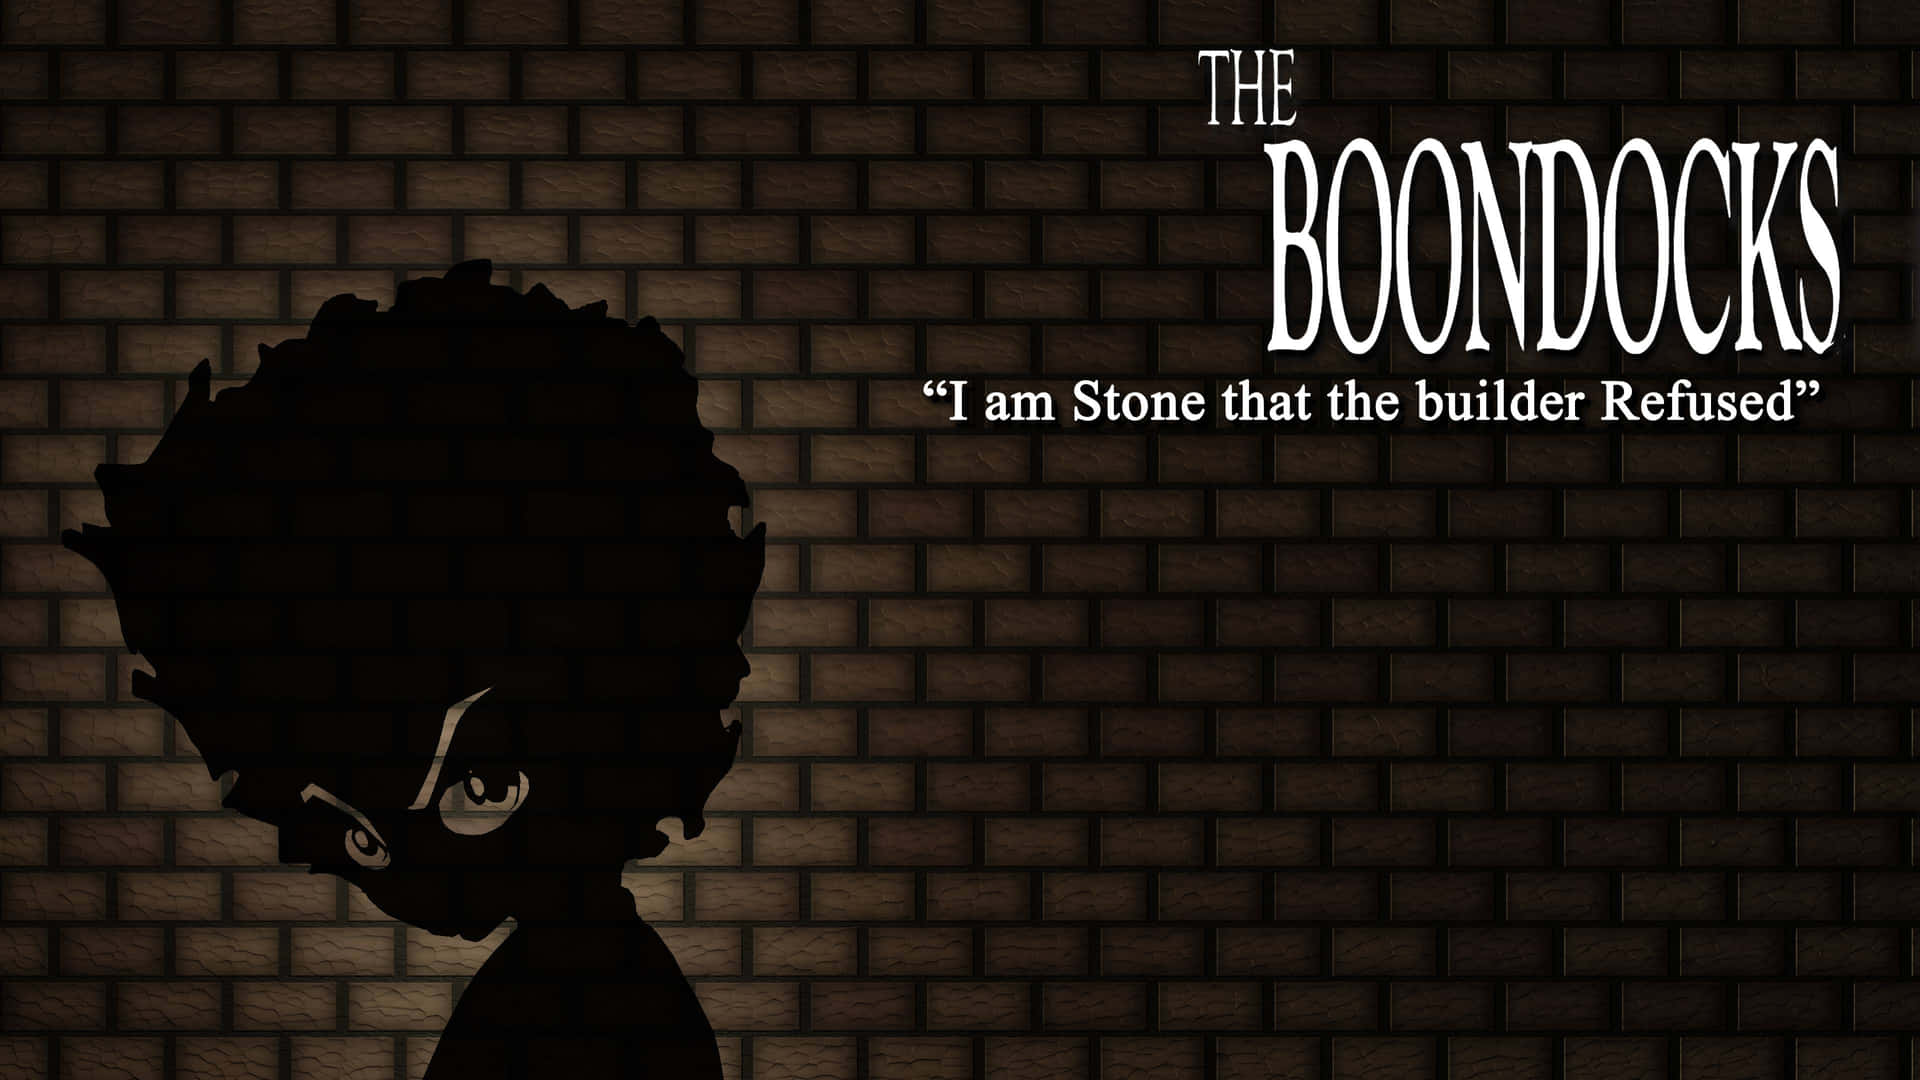 All the crazy adventures of The Boondocks.